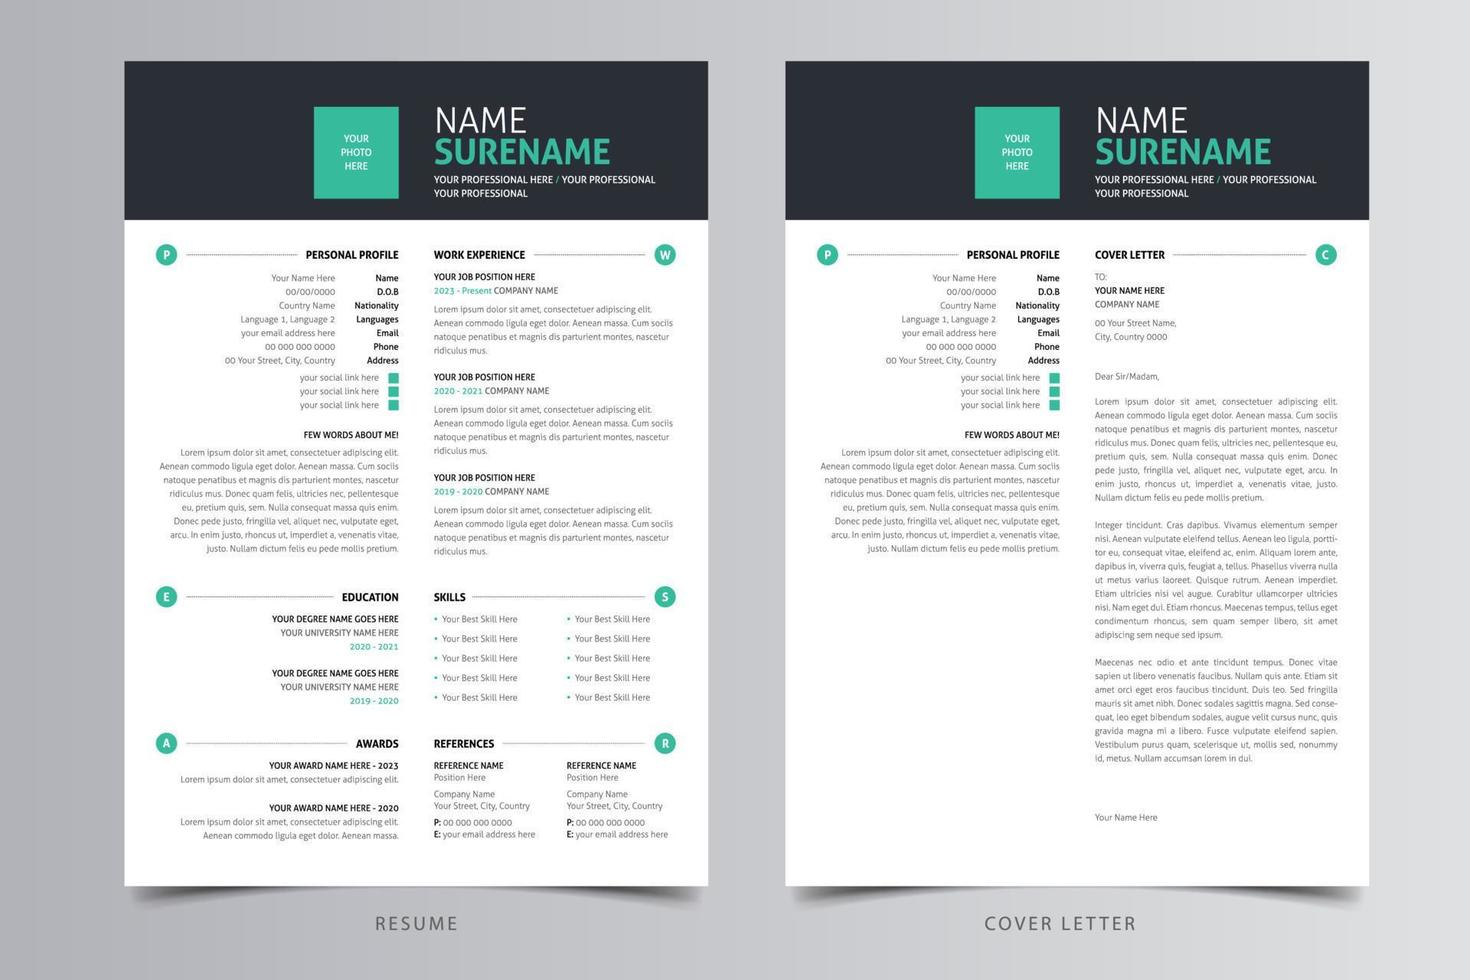 Professional Modern Resume Template, CV Template. Free Download vector